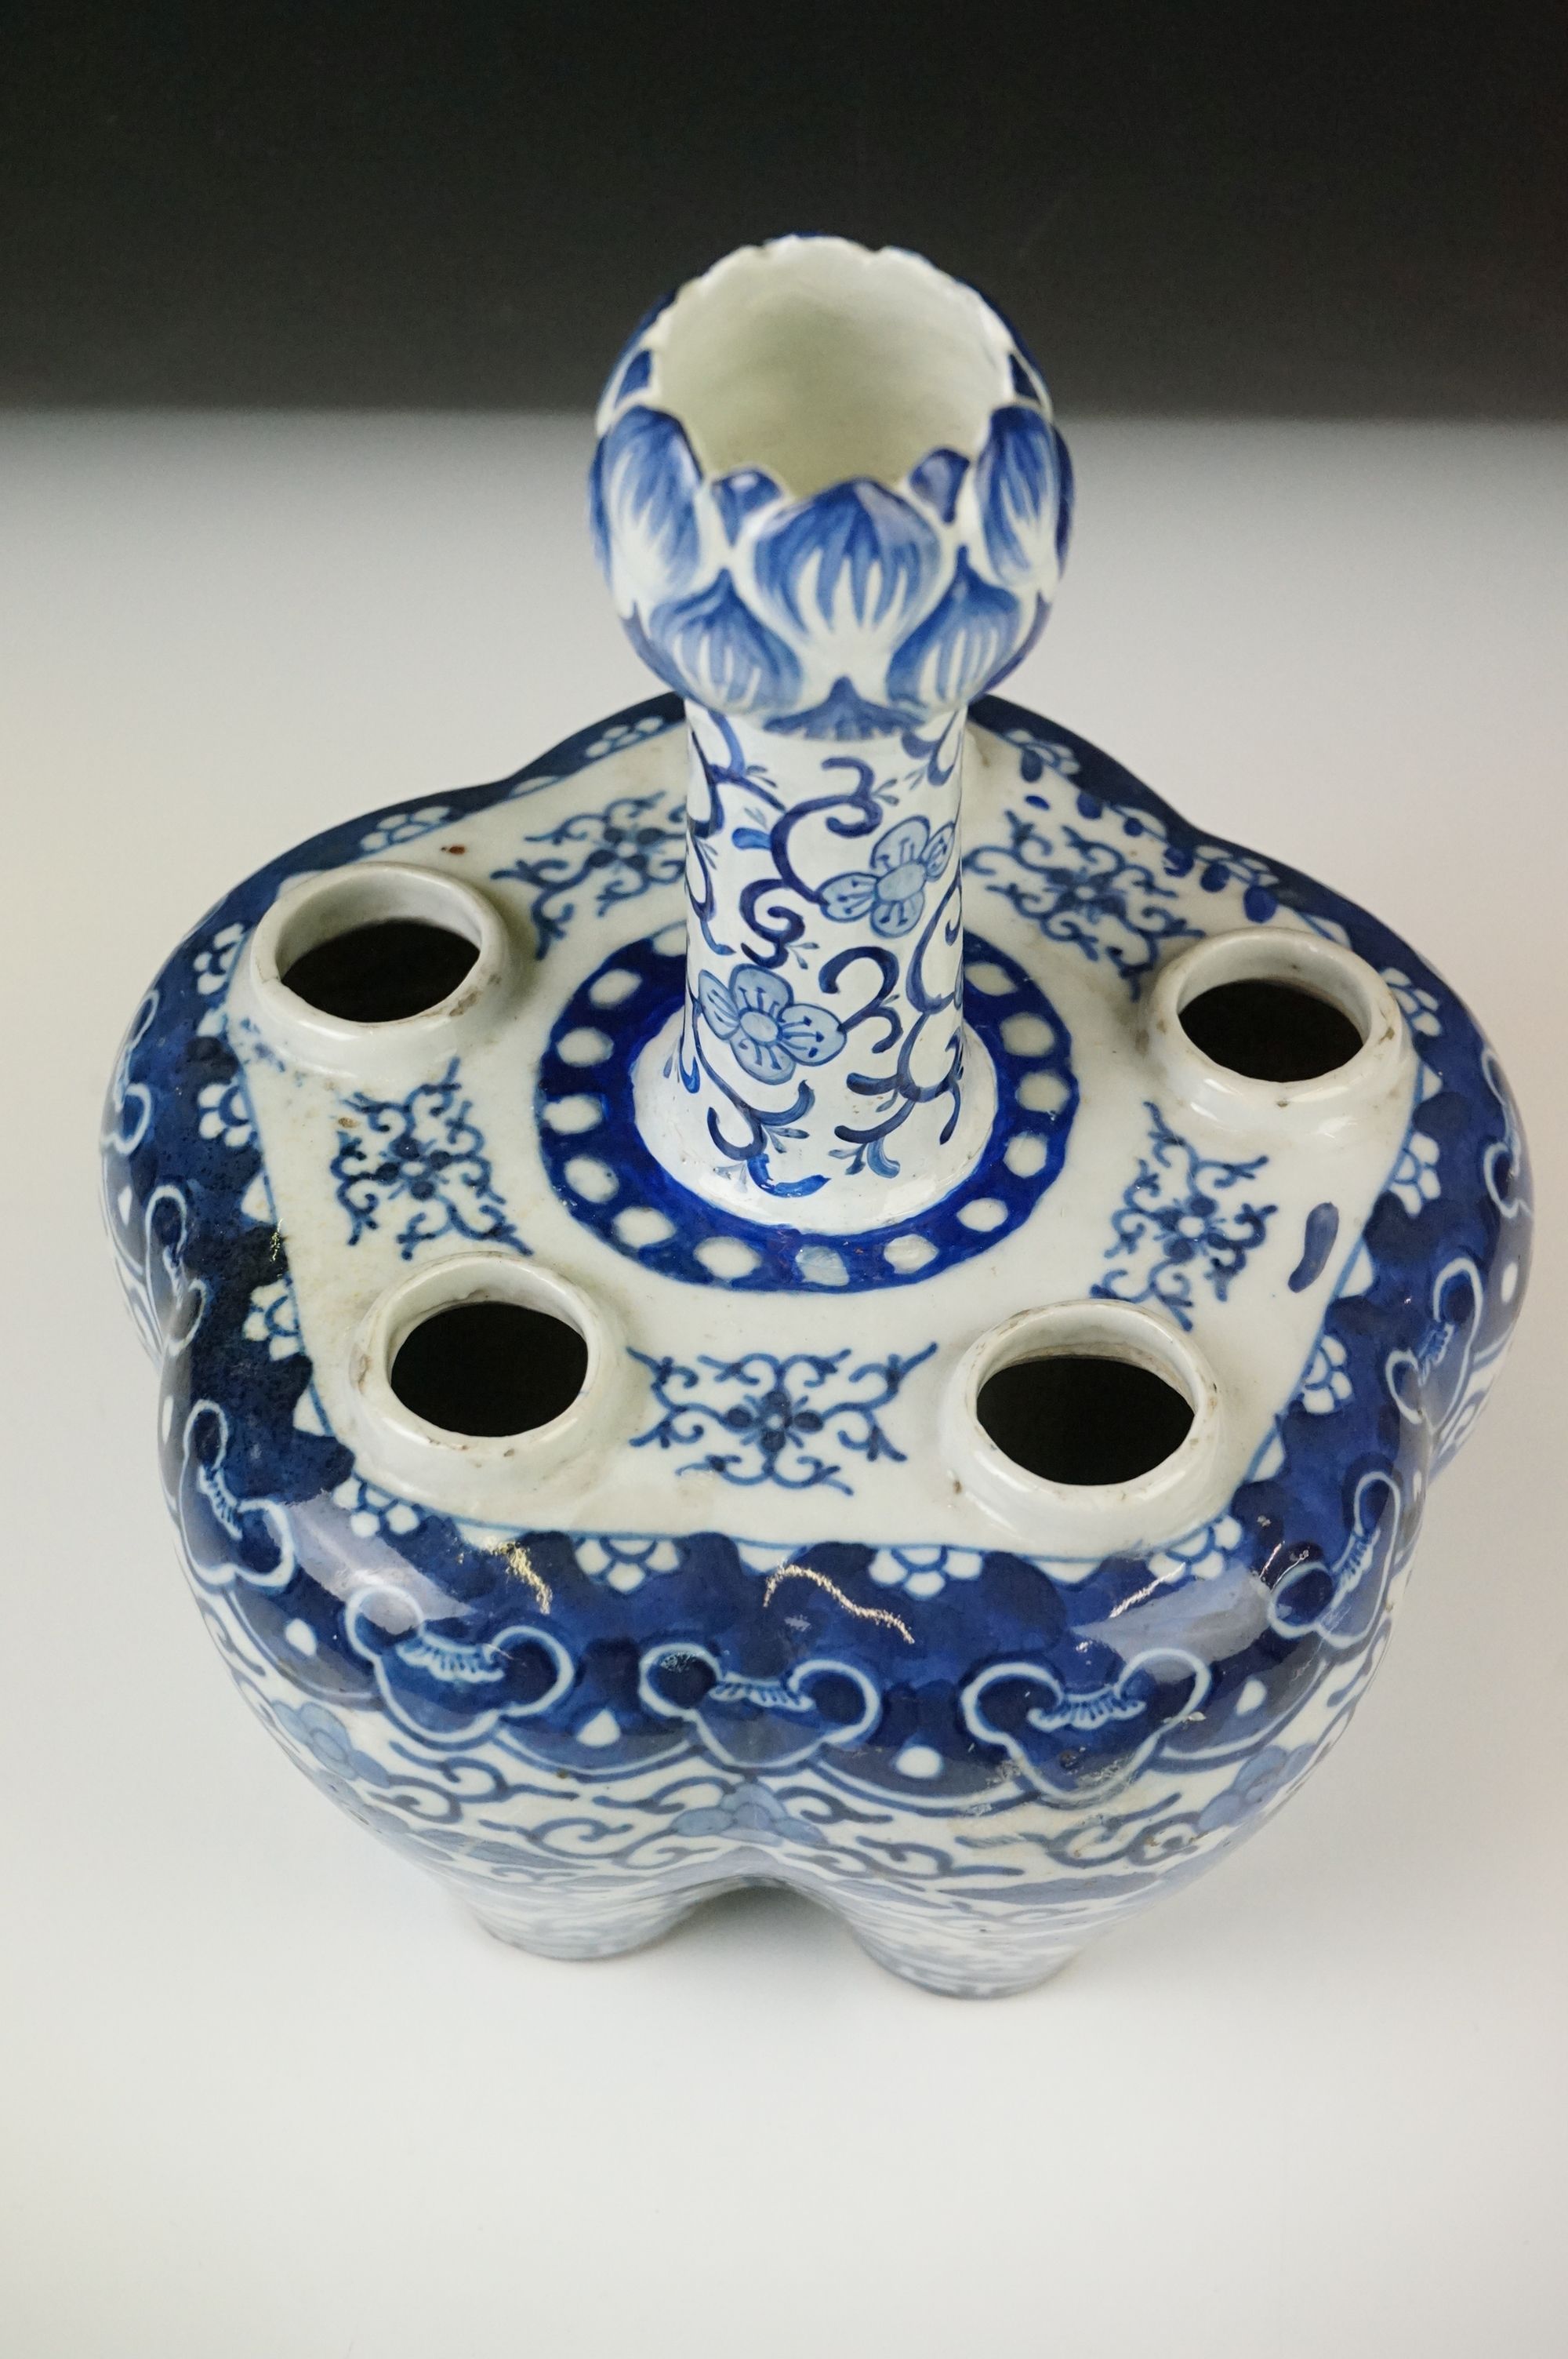 Chinese Porcelain Blue and White Tulip Vase, decorated with birds, flowers and patterned borders, - Image 4 of 6